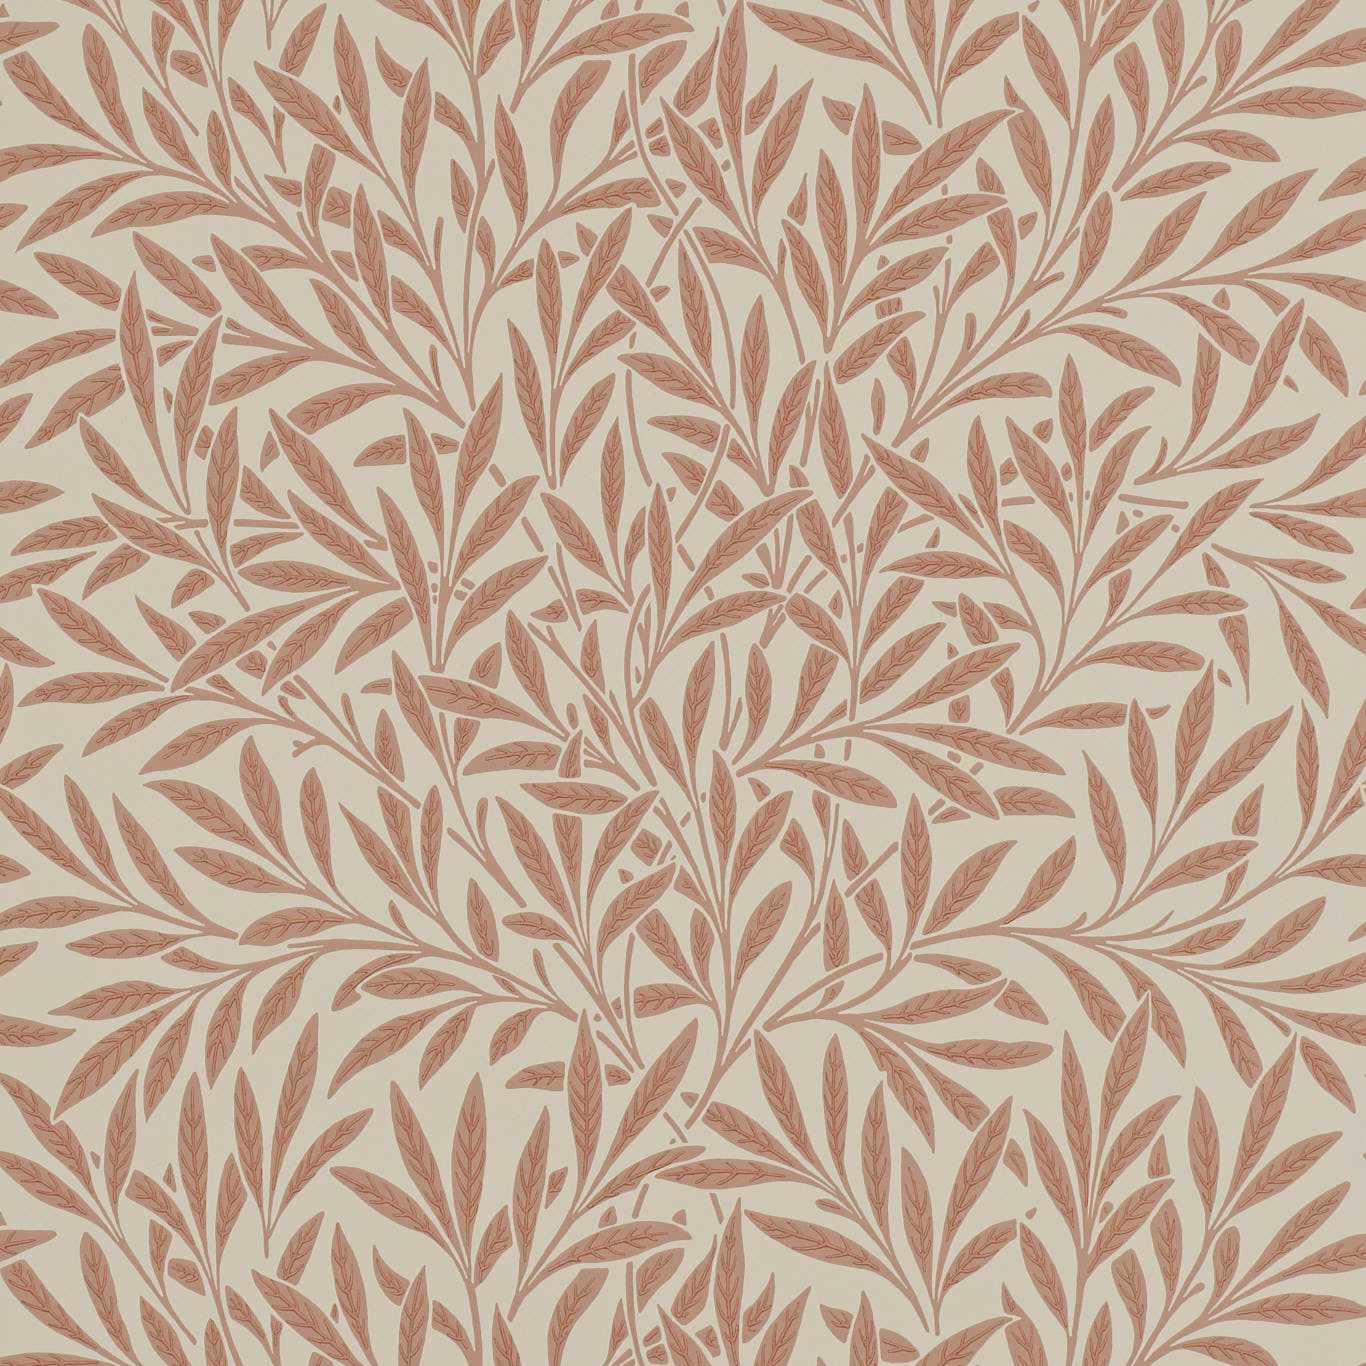 Willow Russet Wallpaper DM6P210381 by Morris & Co